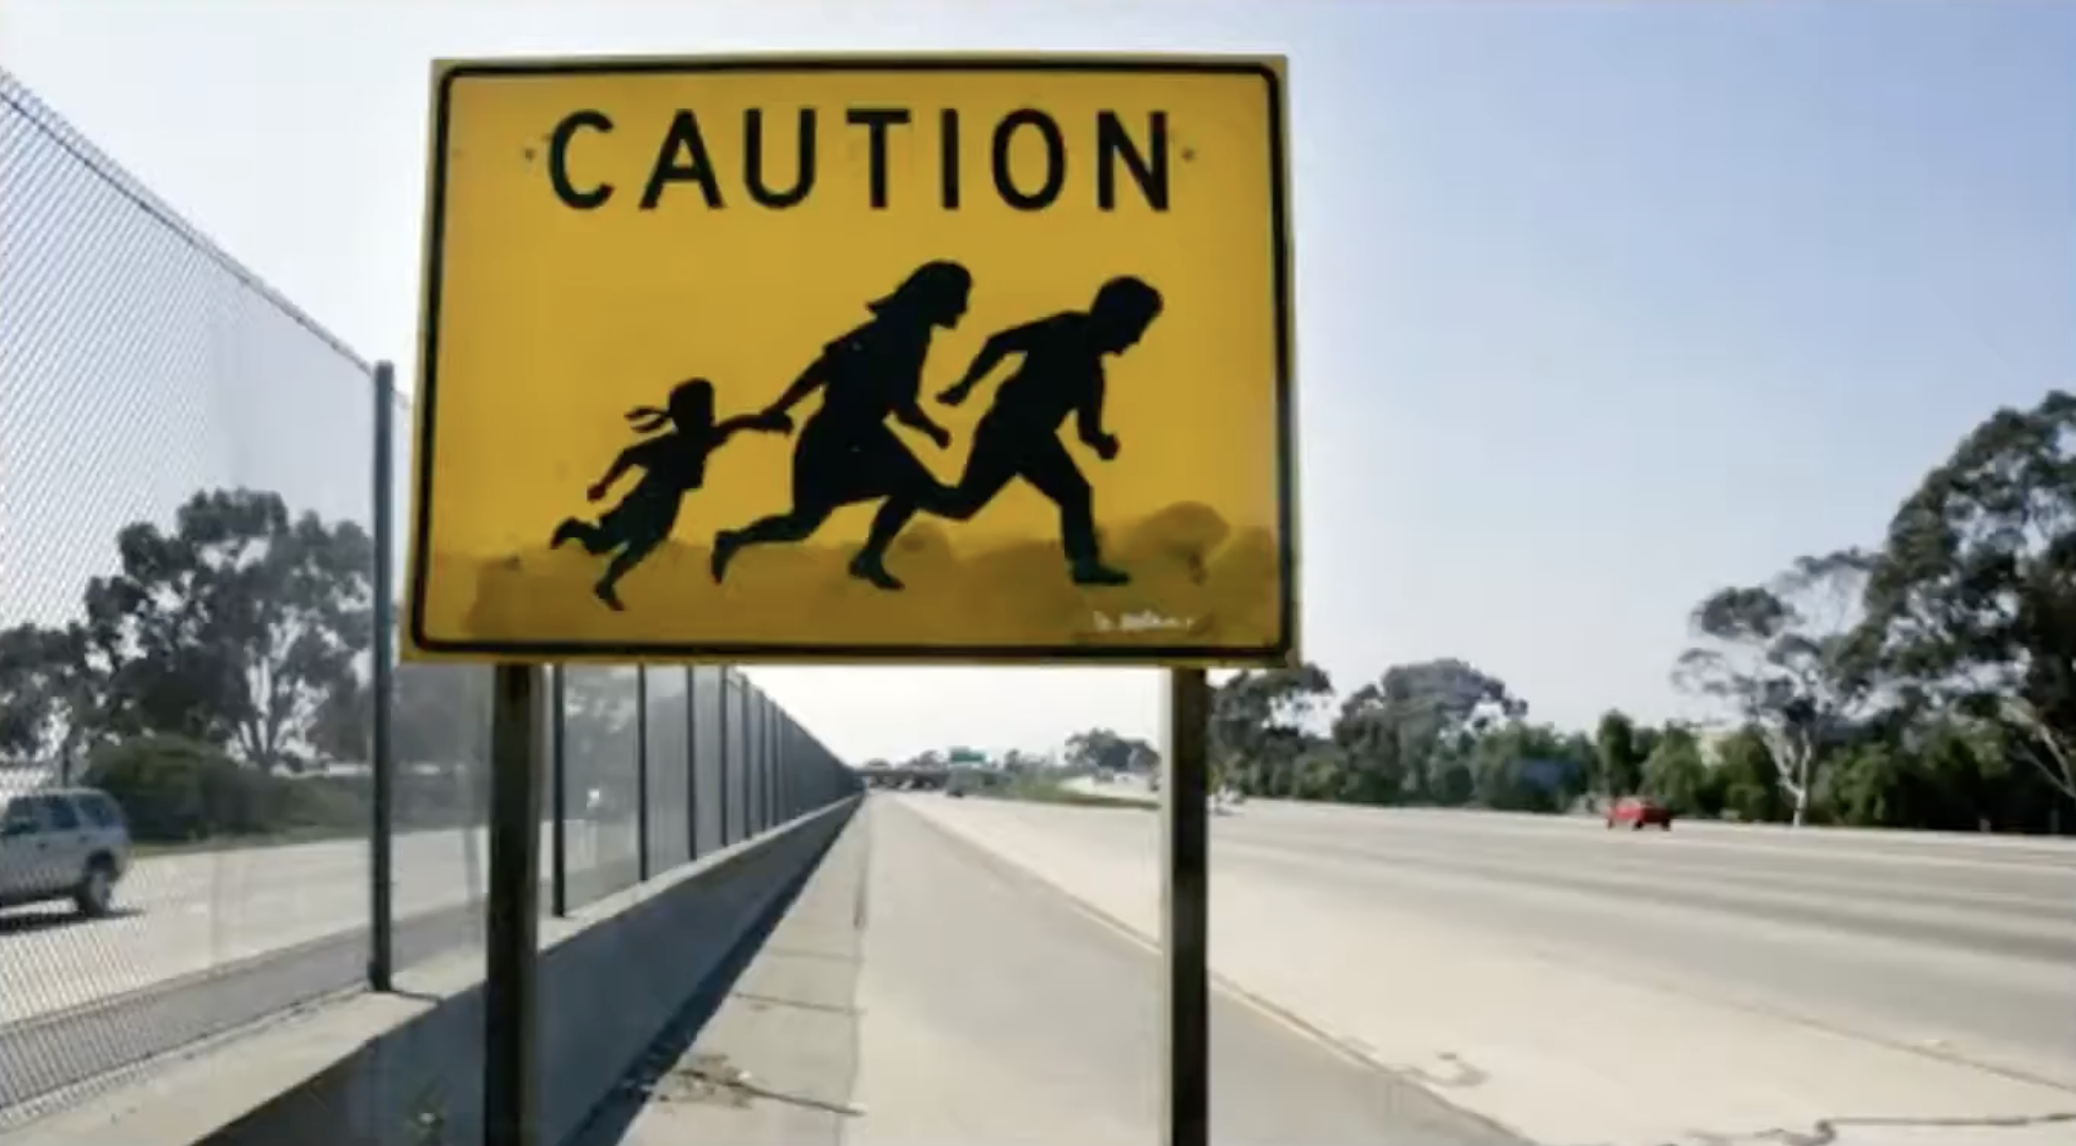 Yellow roadside sign with black figures of man, woman and child running, text, "Caution."